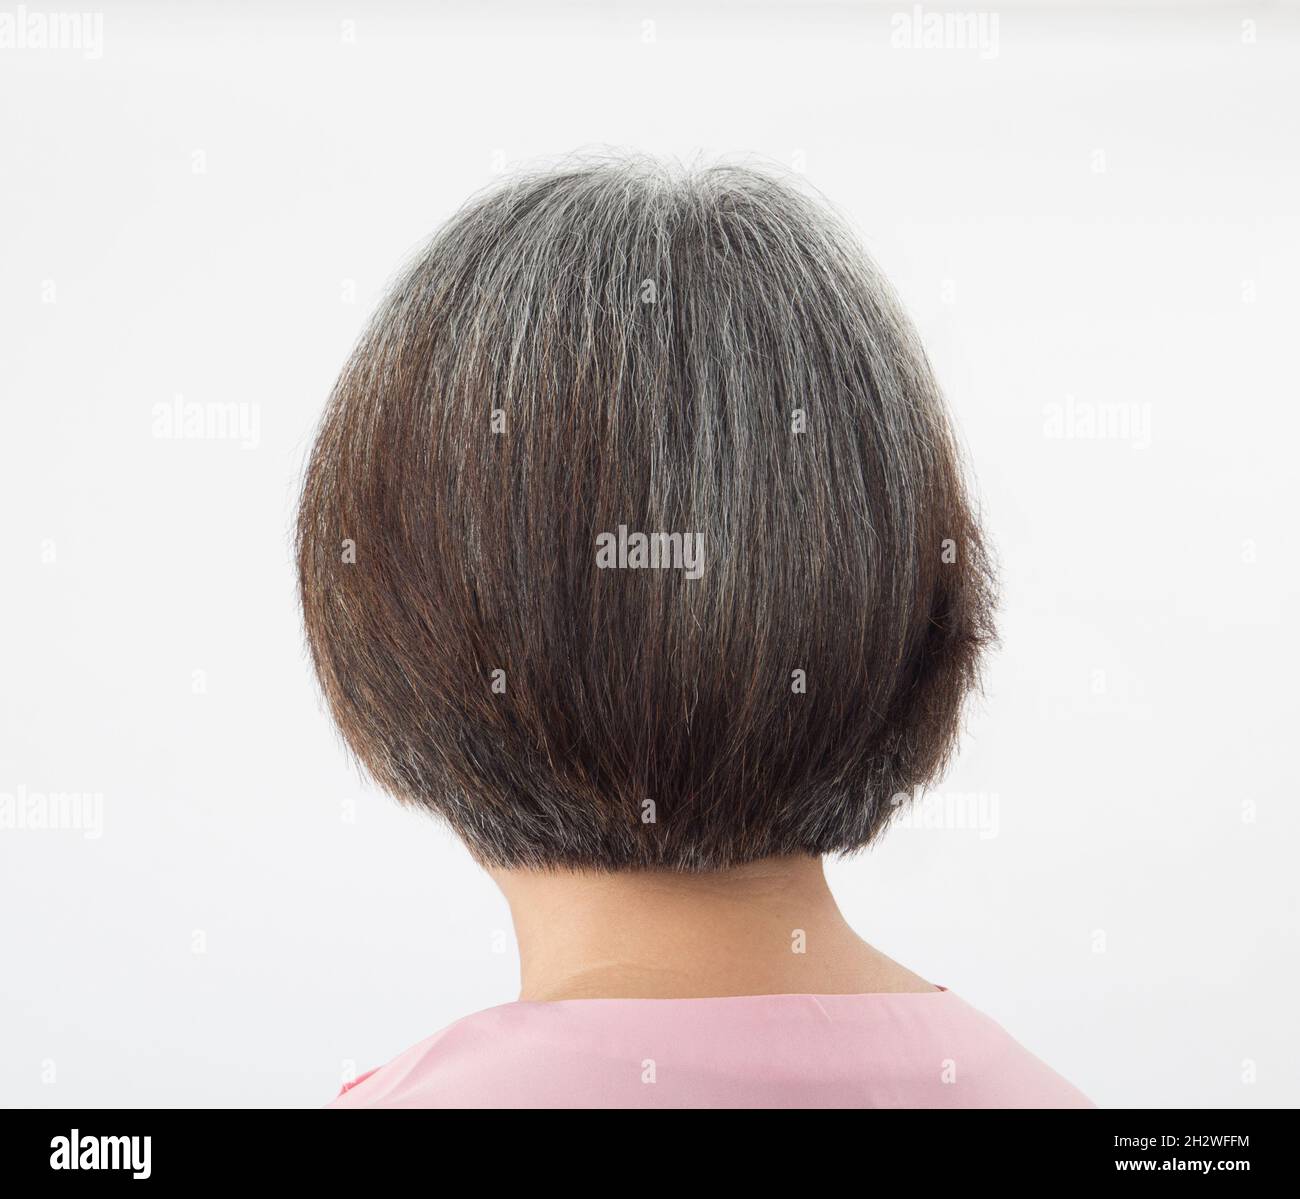 Head of elderly woman tranforming to grey hair, from behind on white background Stock Photo